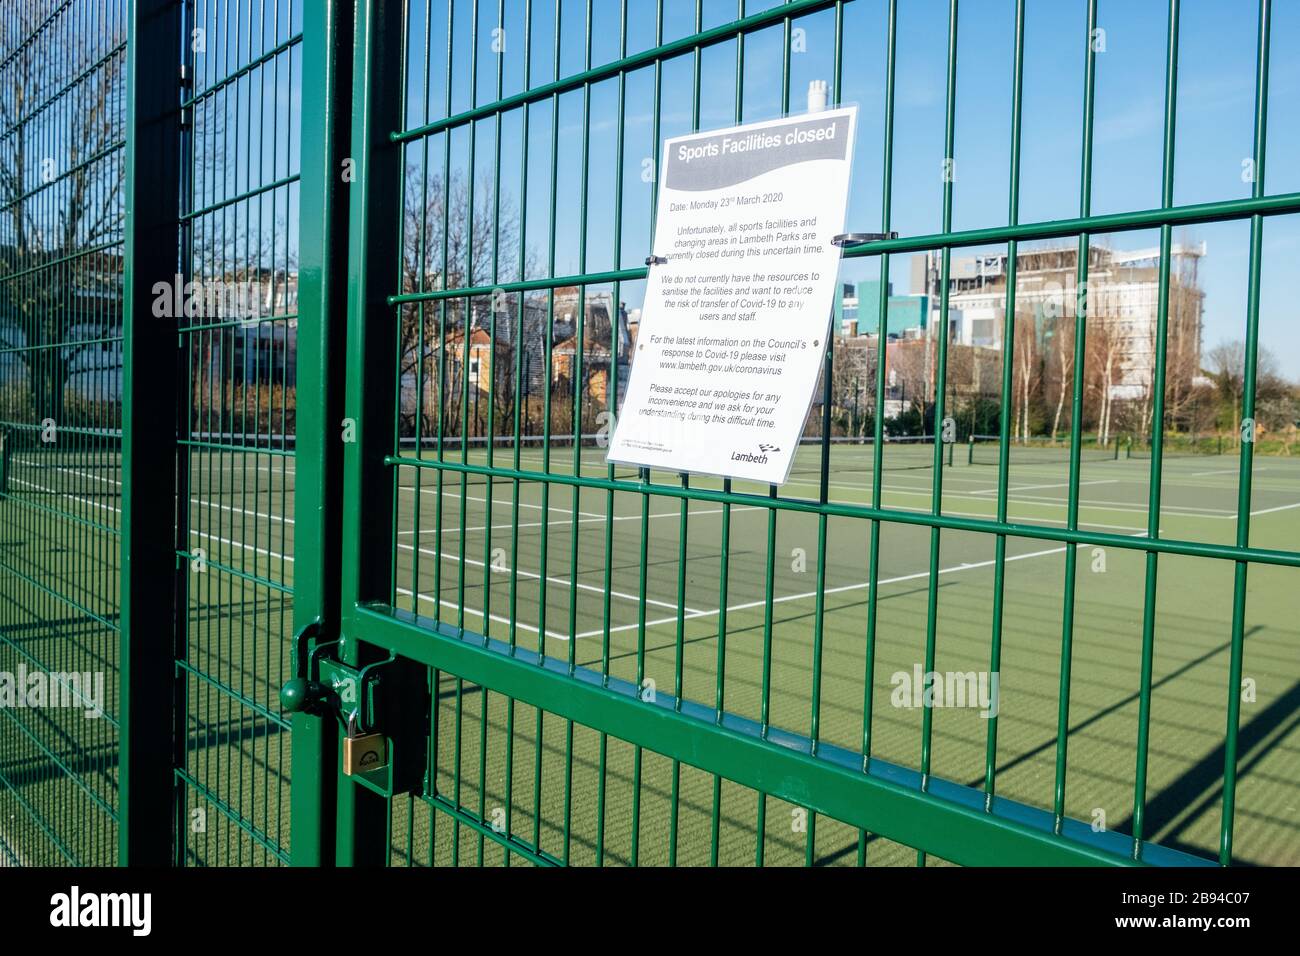 Ruskin Park, Camberwell, London, UK. 23rd March, 2020. Tennis courts with a view of King's College Hospital in the background are locked to prevent the spread of coronavirus. Lambeth Council have closed all sports facilities and playgrounds as they do not have the resources to sanitise the facilities sufficiently. Credit: Tom Leighton/Alamy Live News Stock Photo